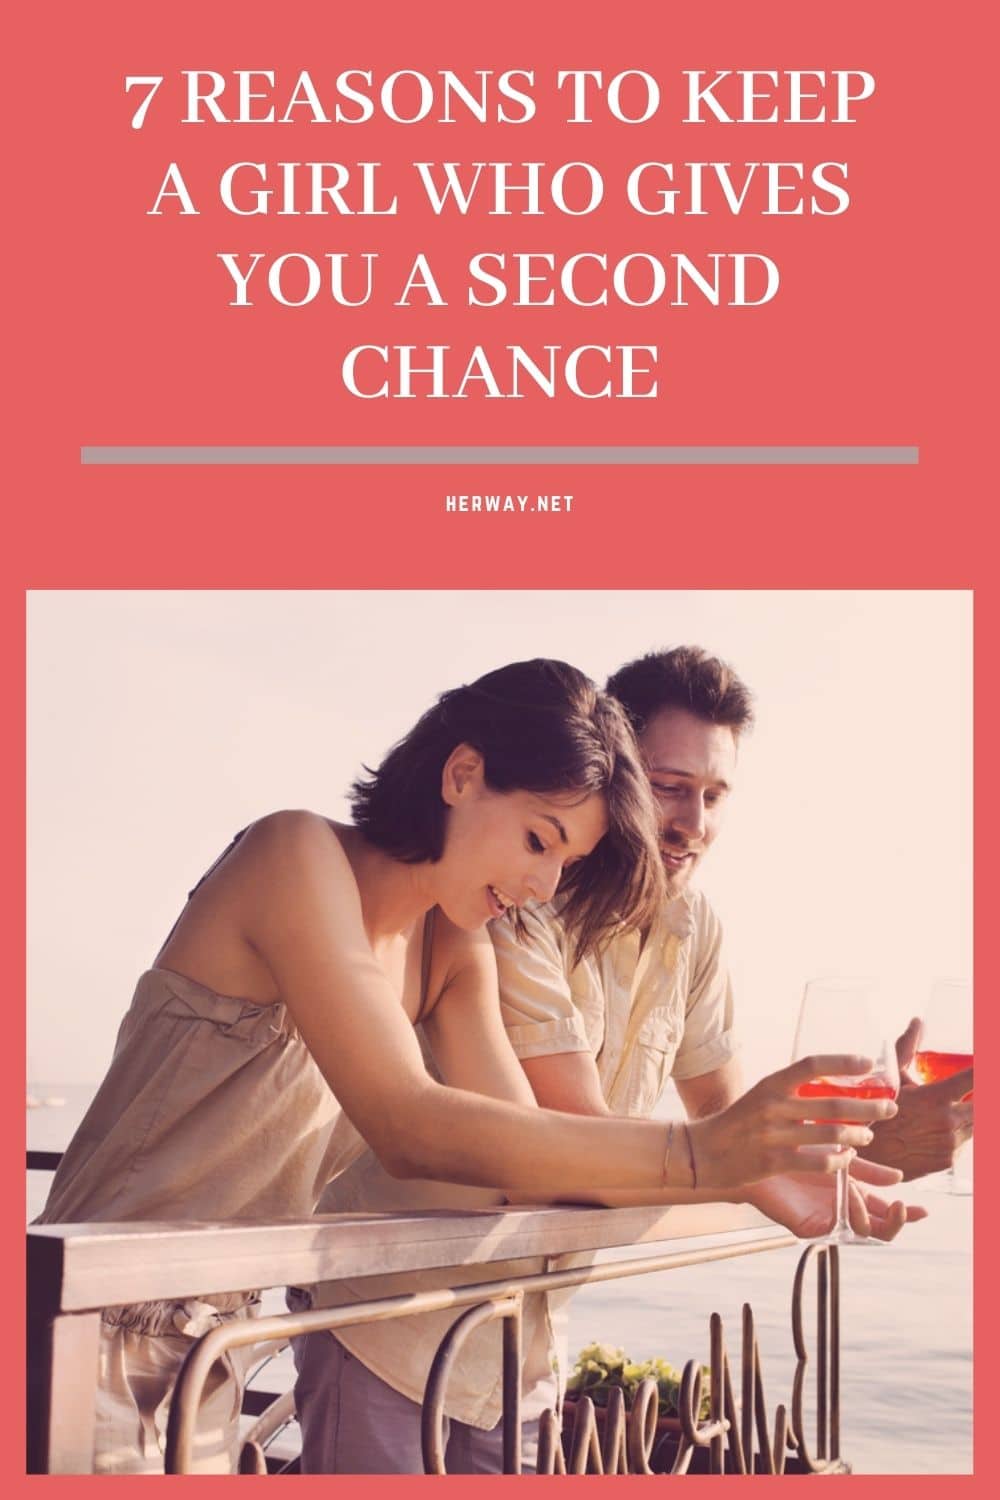 7 Reasons To Keep A Girl Who Gives You A Second Chance